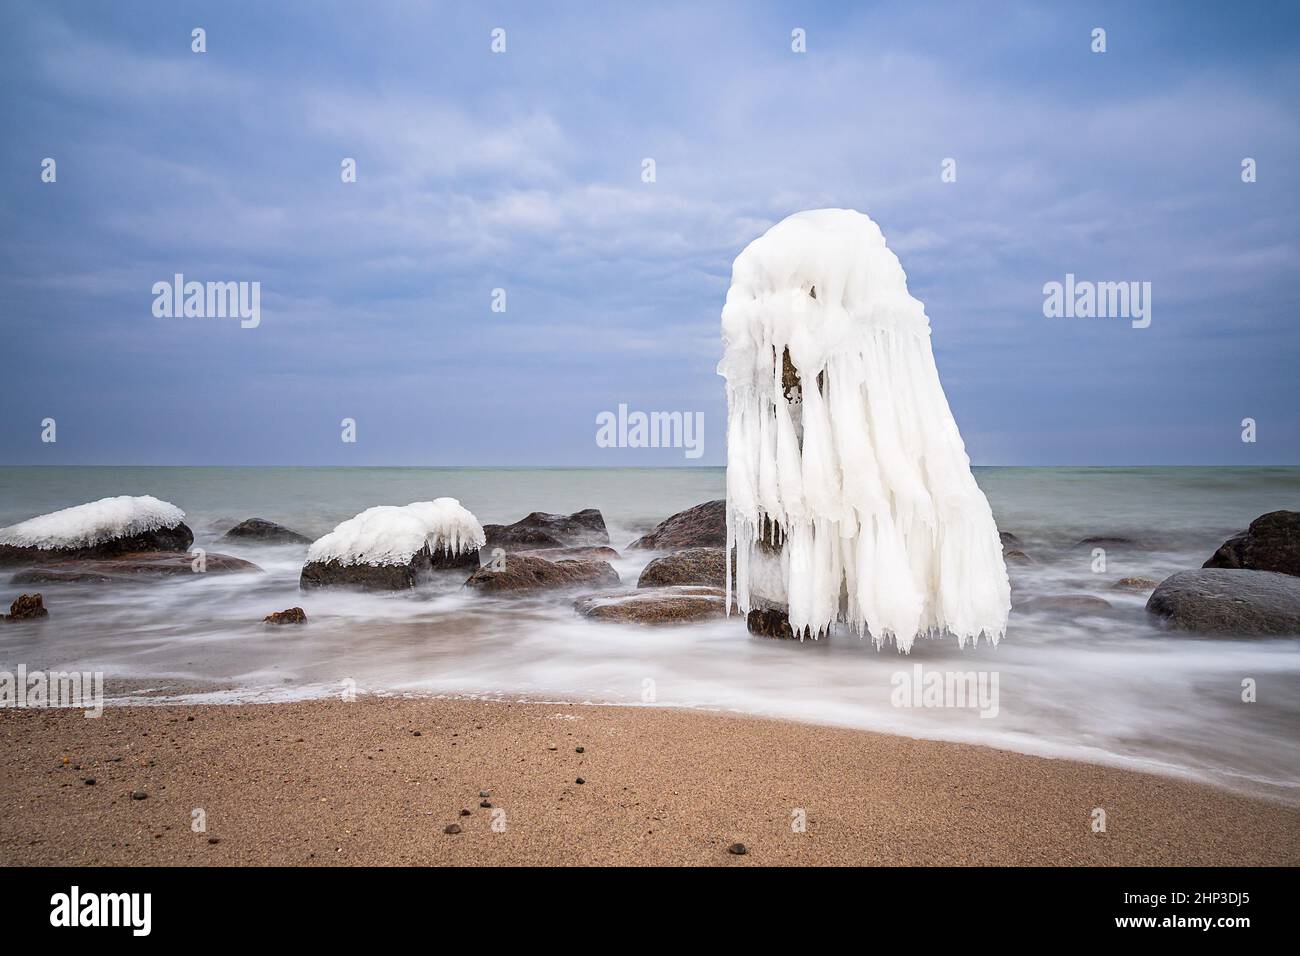 Winter on shore of the Baltic Sea in Kuehlungsborn, Germany. Stock Photo